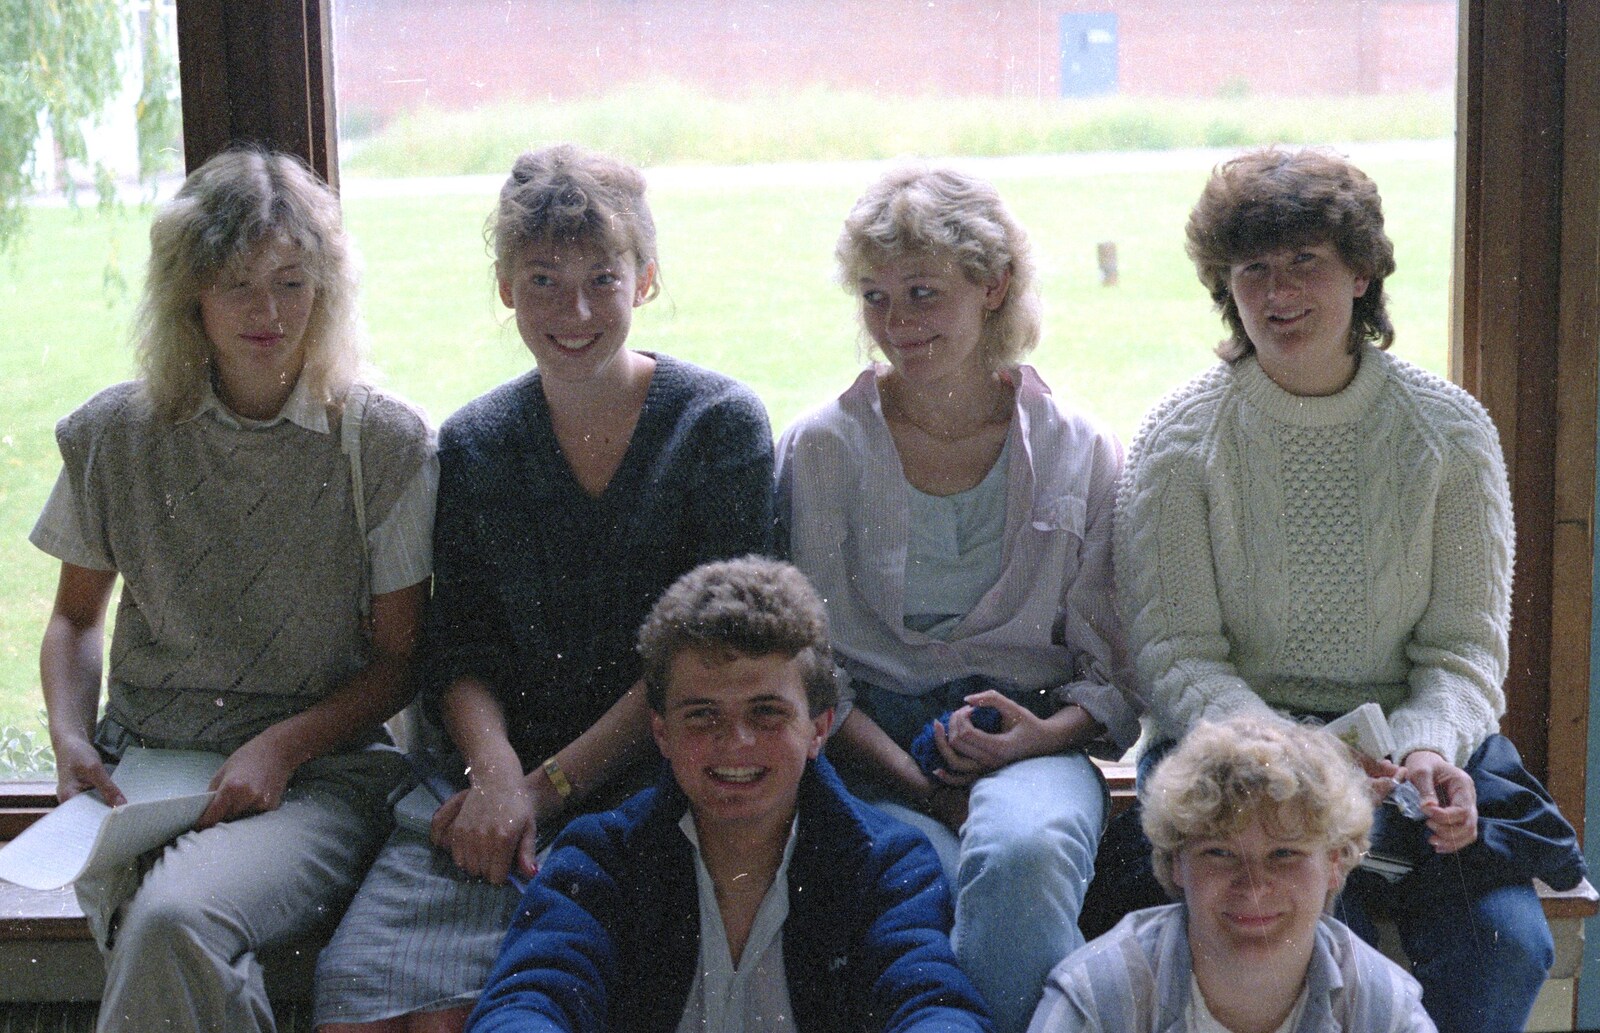 Anne, Paula, Ray, Sue, Anna and Lise  from Brockenhurst College Exams and Miscellany, Barton on Sea, Hampshire - 10th June 1985